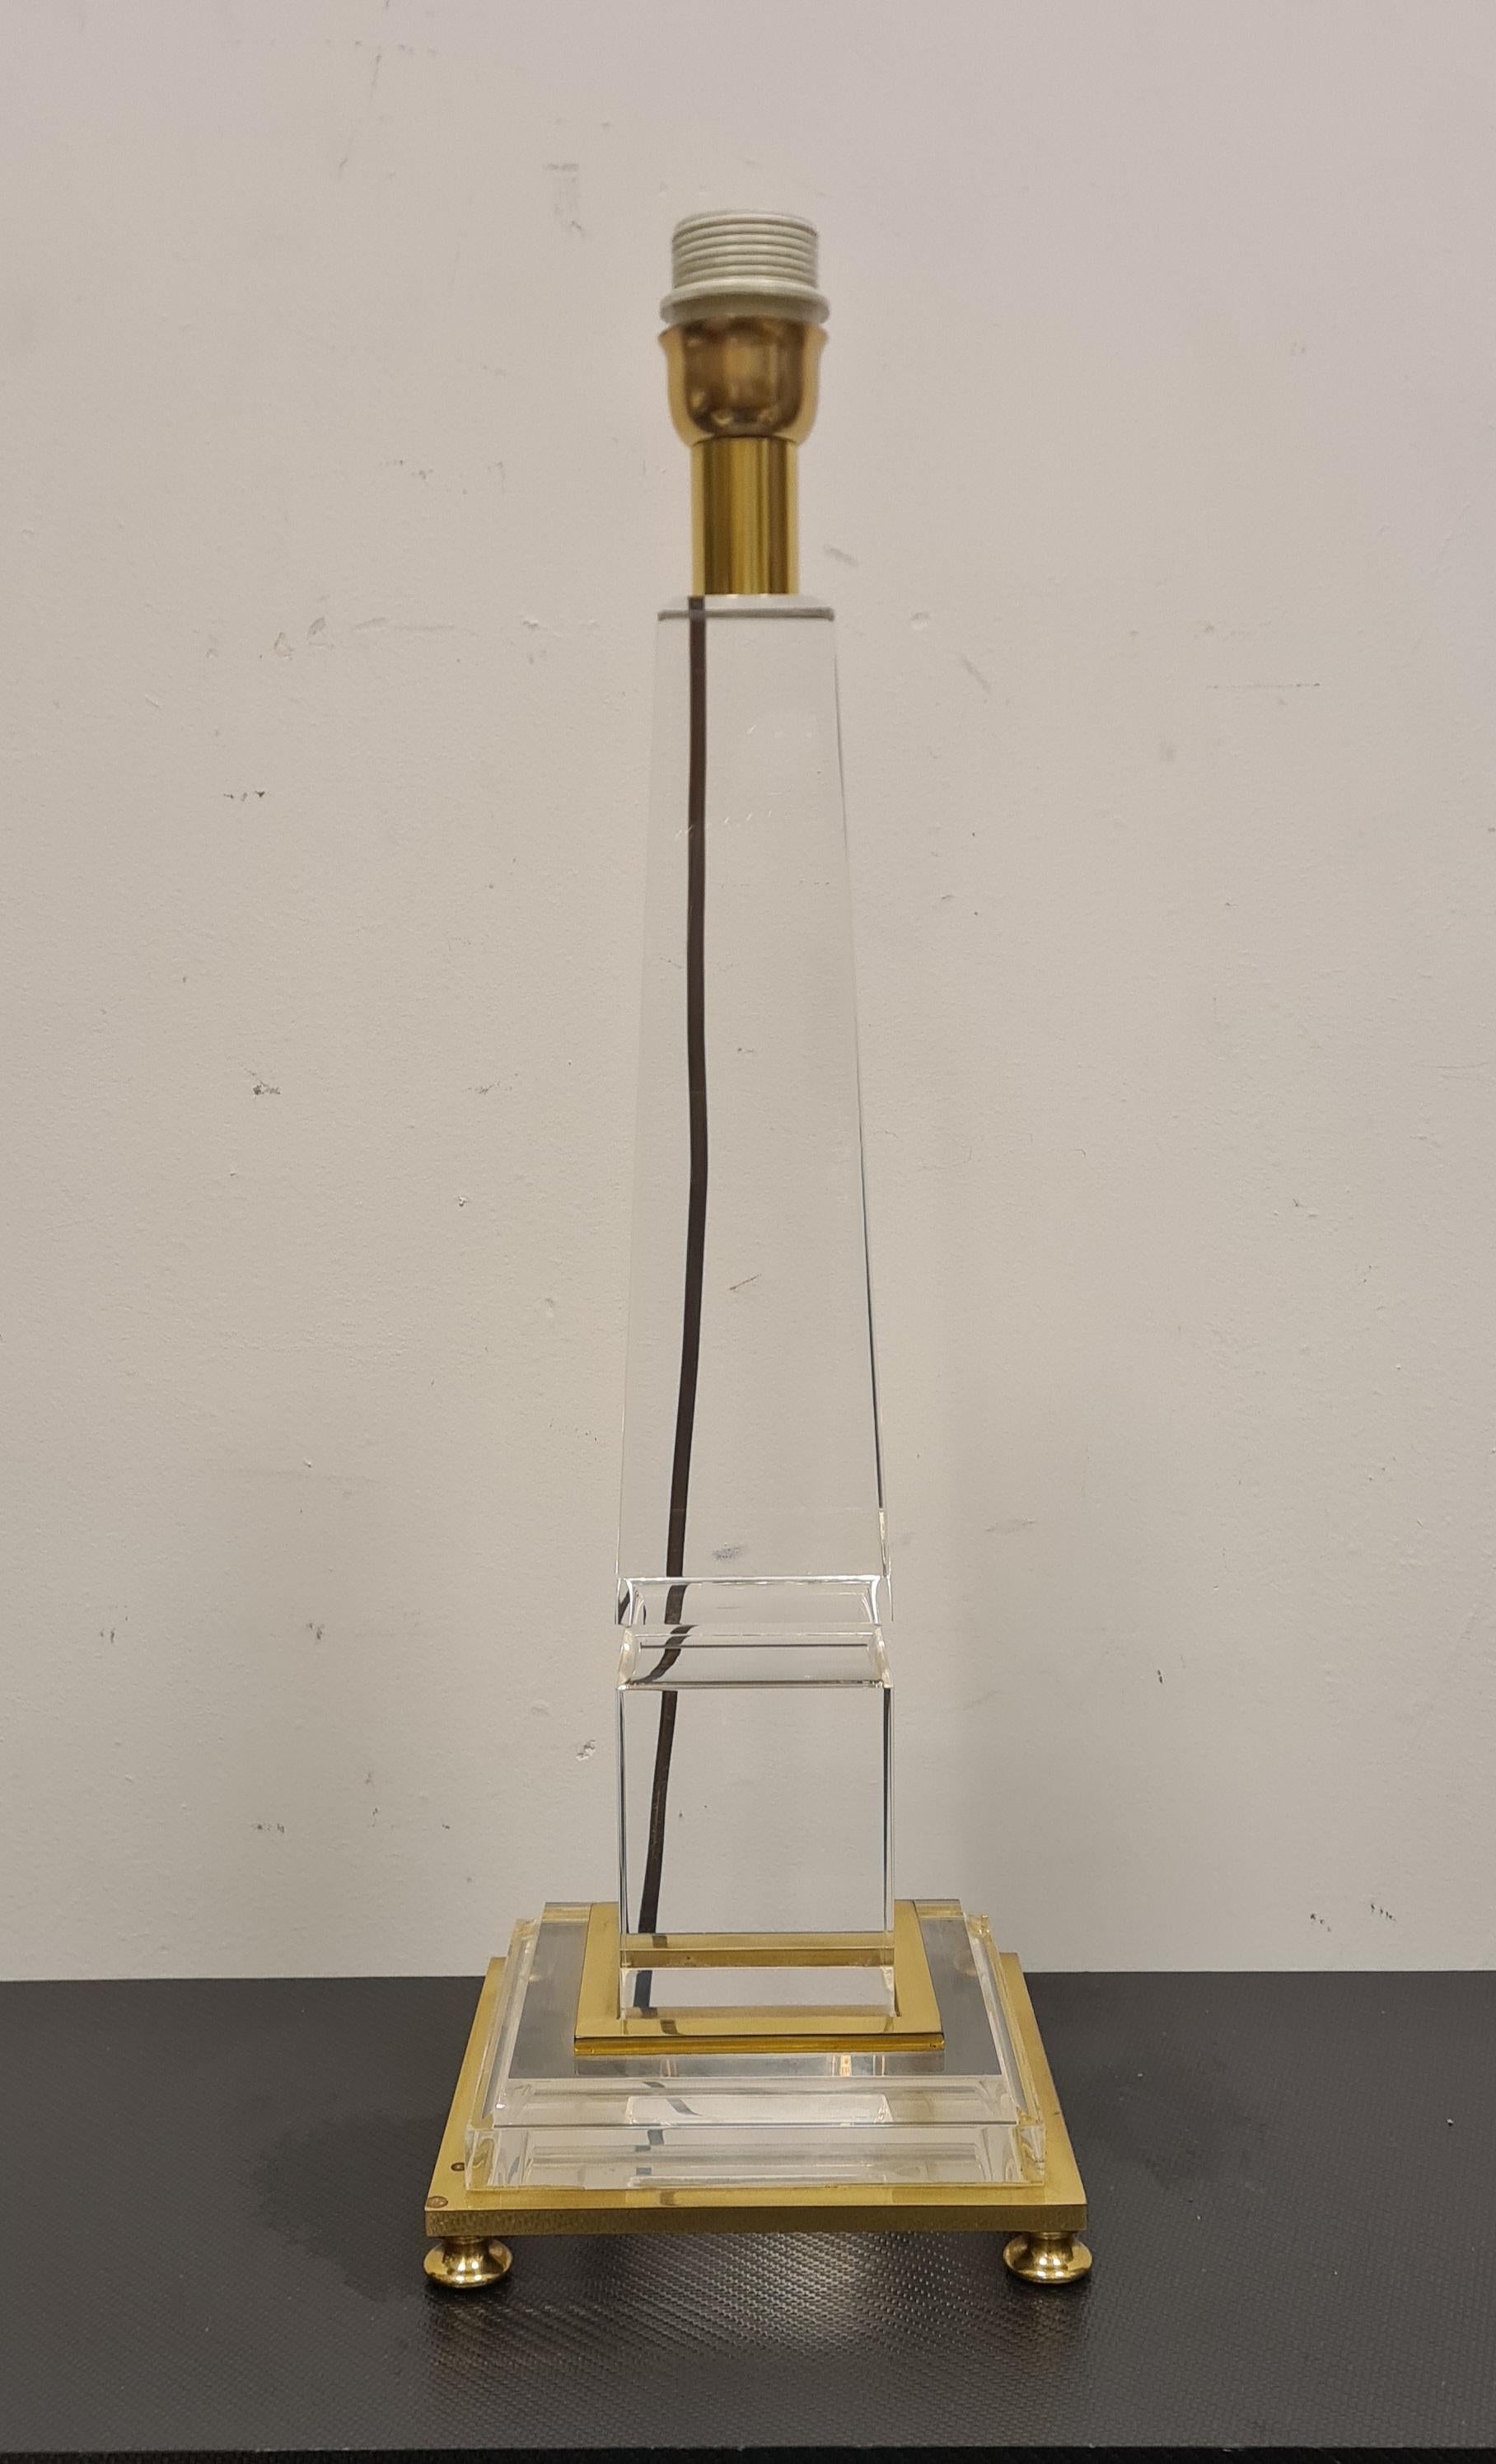 Table lamp with Obelisk base designed by Sandro Petti.

Refined methacrylate and brass Obelisk-shaped lamp with fabric shade.

Elegant and discreet, this lamp, in the Hollywood Regency style typical of the 1970s, will give sobriety and rigor to your